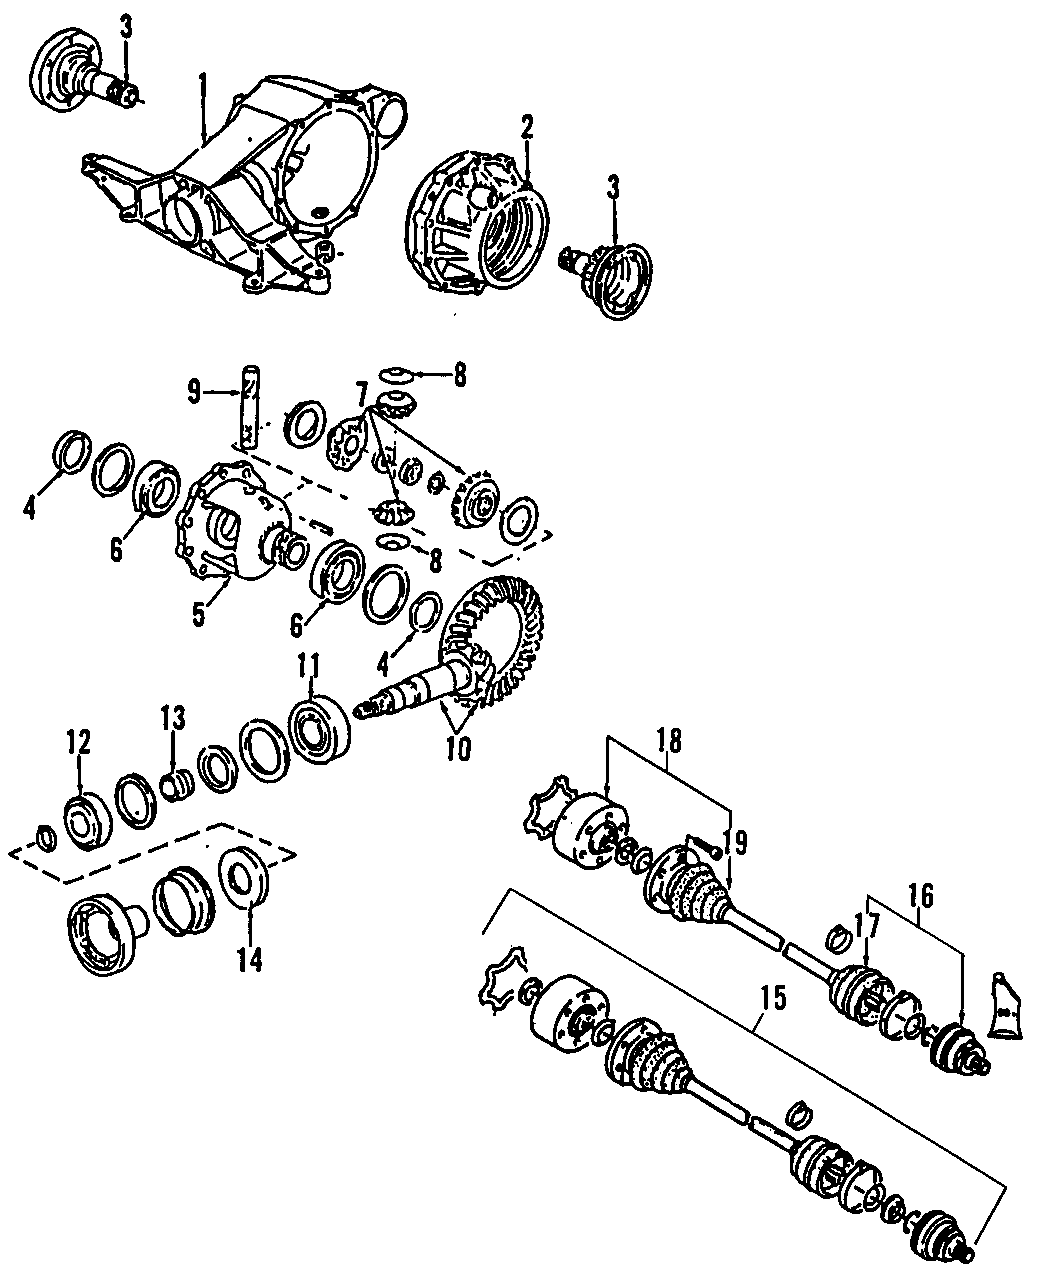 16DRIVE AXLES. REAR AXLE. AXLE SHAFTS & JOINTS. DIFFERENTIAL. PROPELLER SHAFT.https://images.simplepart.com/images/parts/motor/fullsize/F208150.png